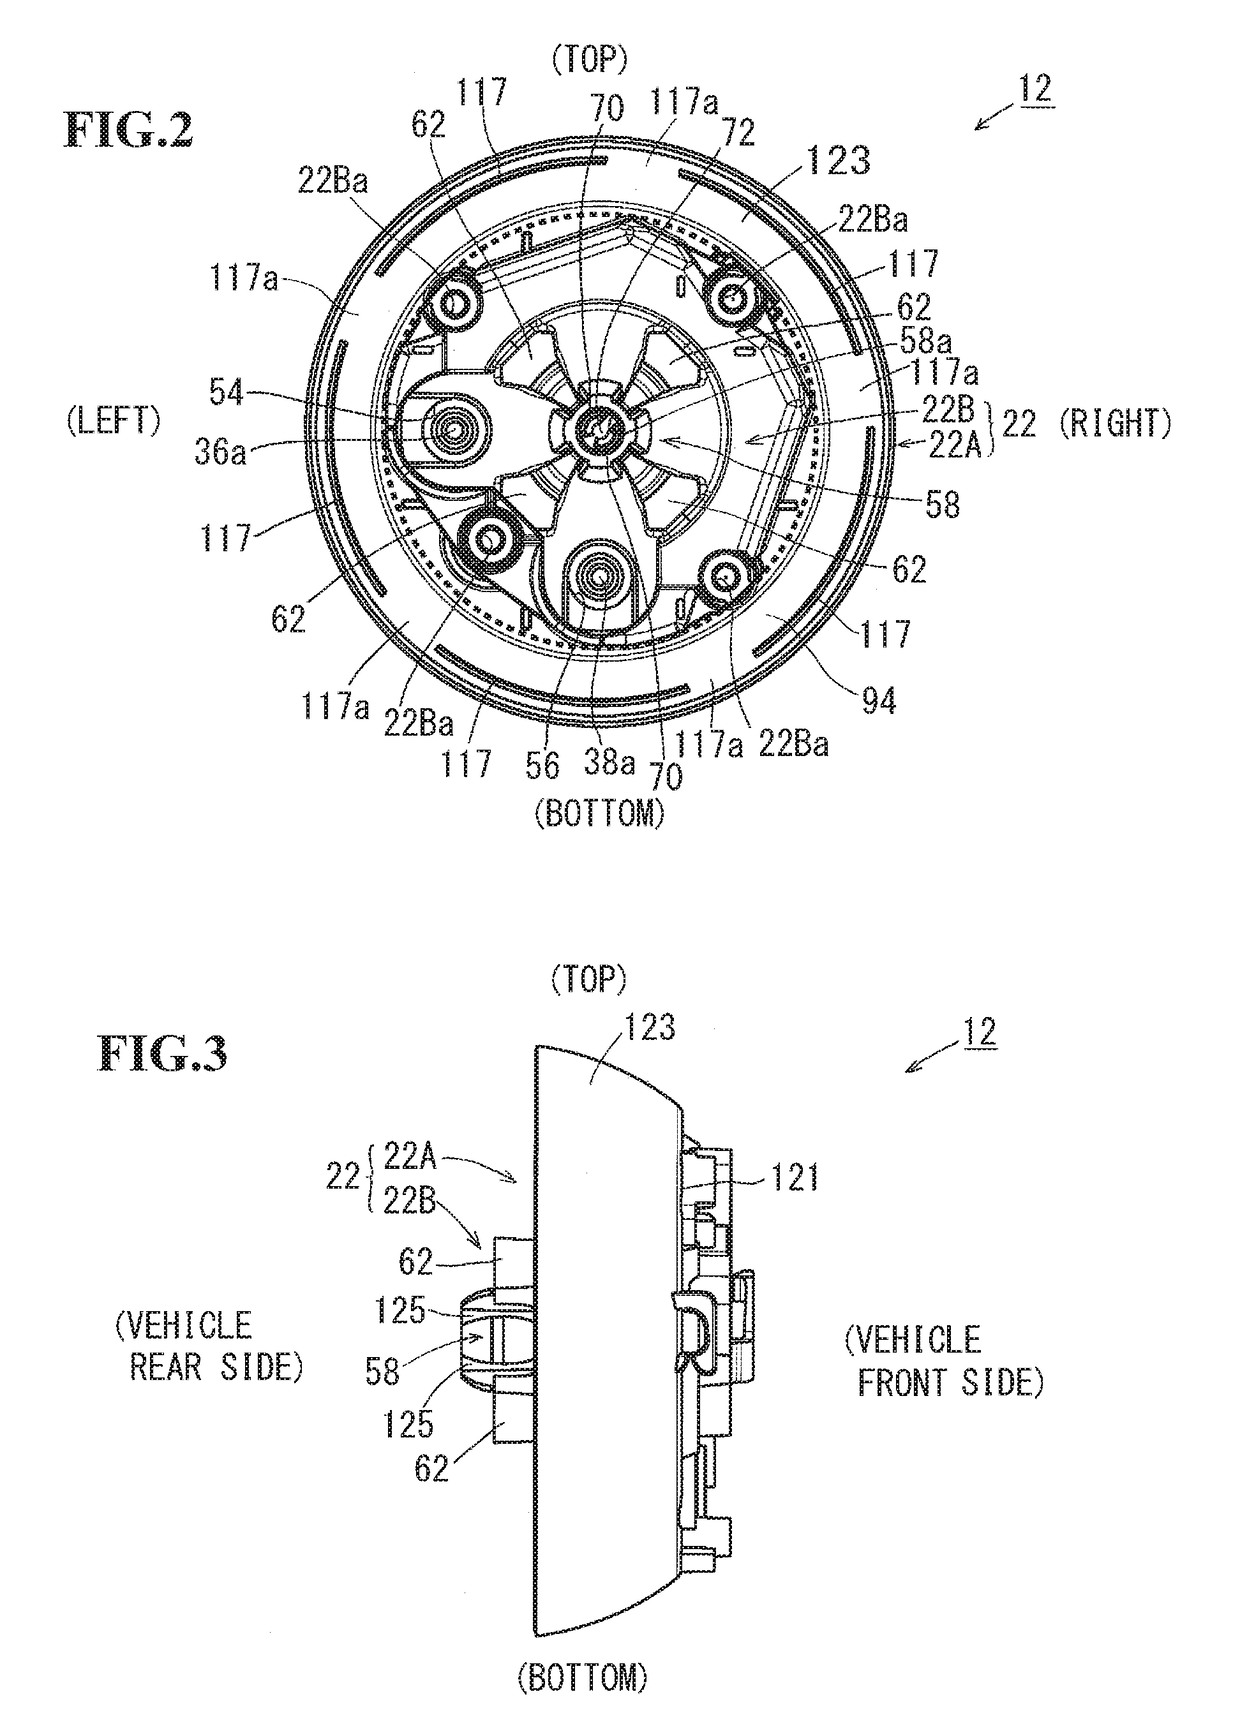 View angle adjustment mechanism in view device